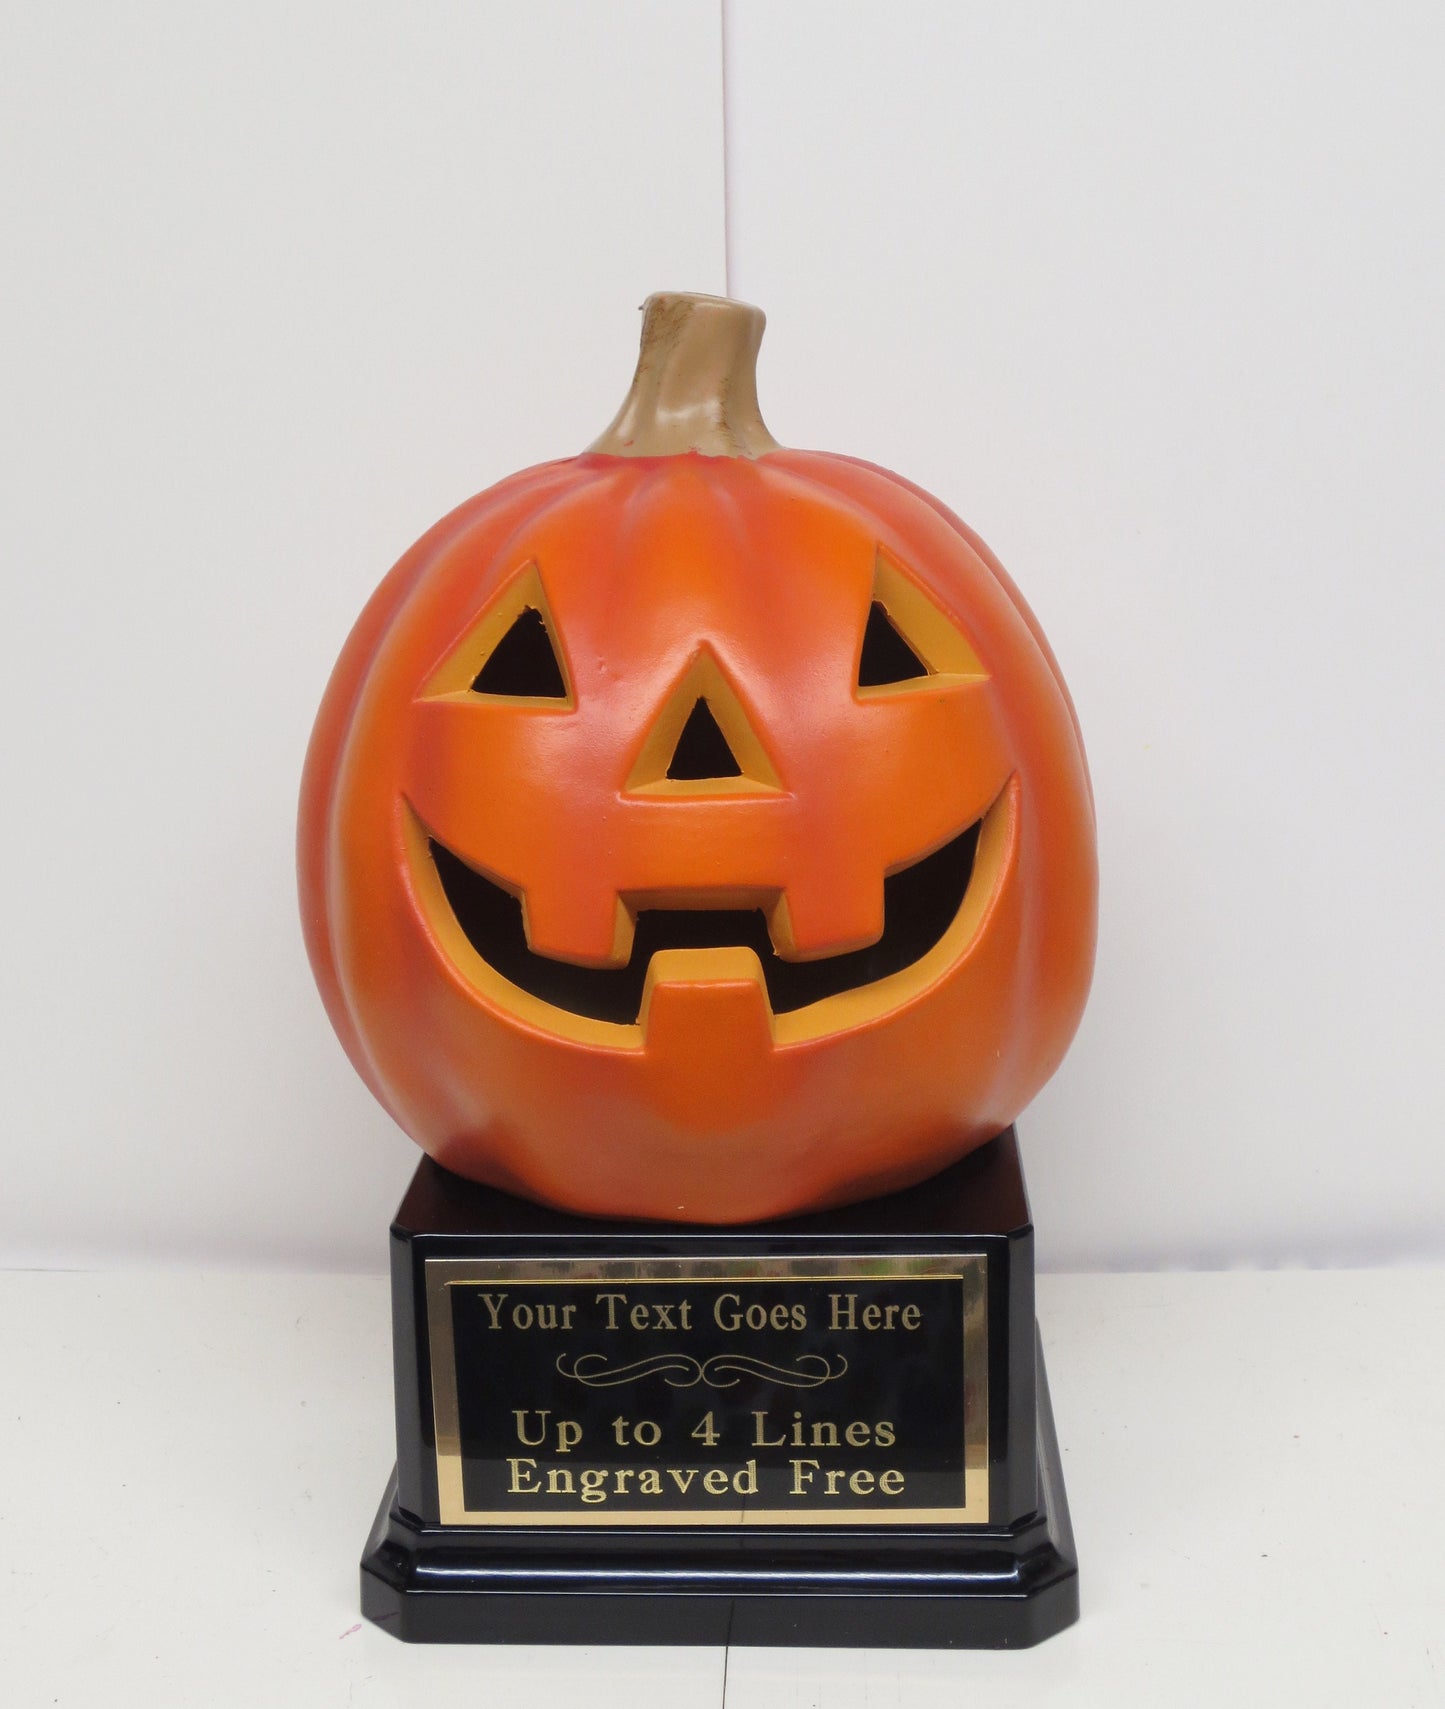 Costume Party Prize Halloween Trophy Pumpkin Carving Contest Trophy or Best Costume Contest Jack O Lantern Halloween Decor